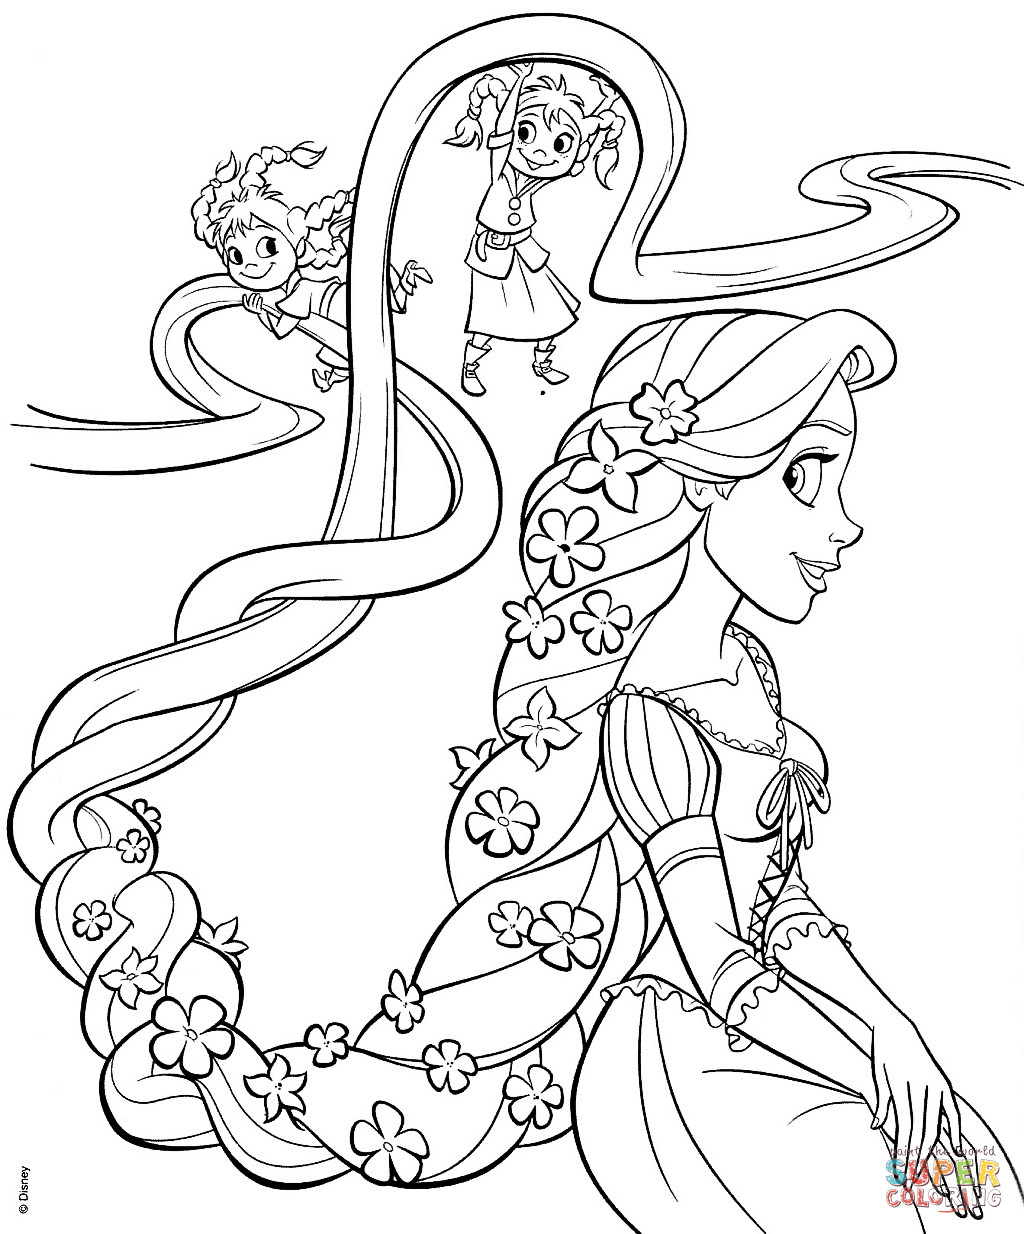 Rapunzel Printable Coloring Pages
 Rapunzel and Four Sisters coloring page